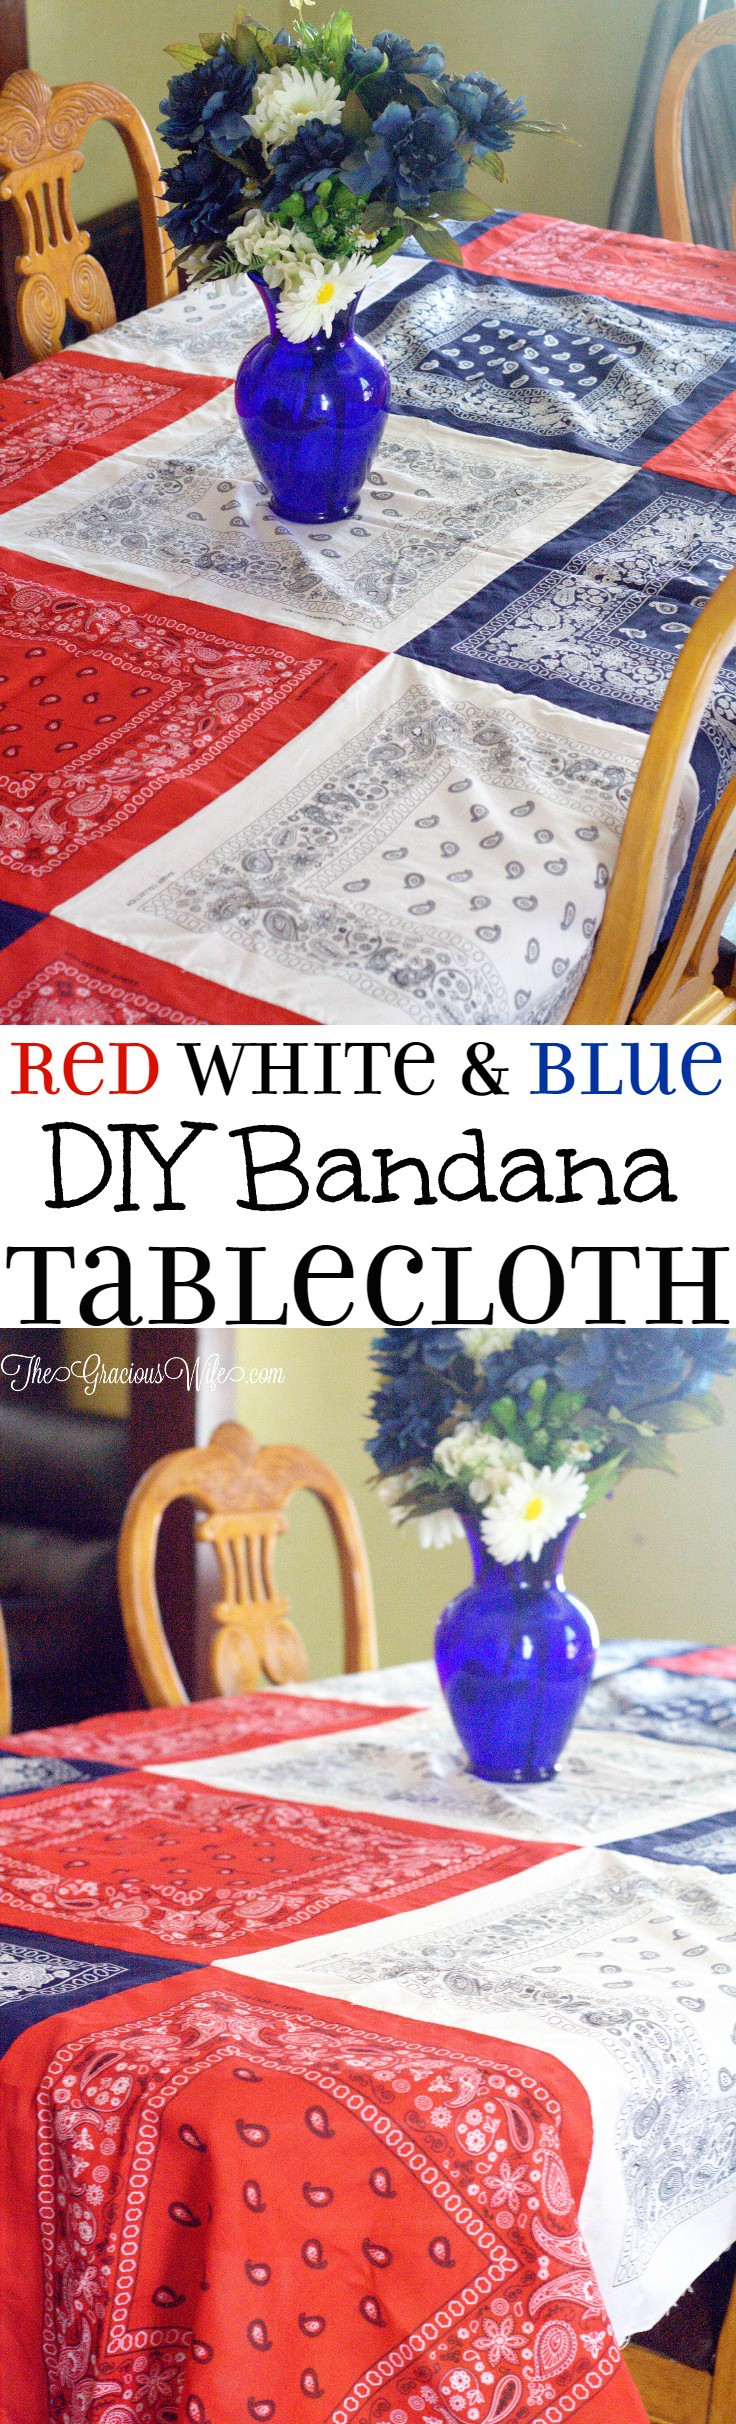 How to Make an Easy DIY Bandana Tablecloth - This easy patriotic red, white, and blue DIY Bandana Tablecloth is a fun and frugal Summer and 4th of July patriotic idea, with a full tutorial. So cute and festive!